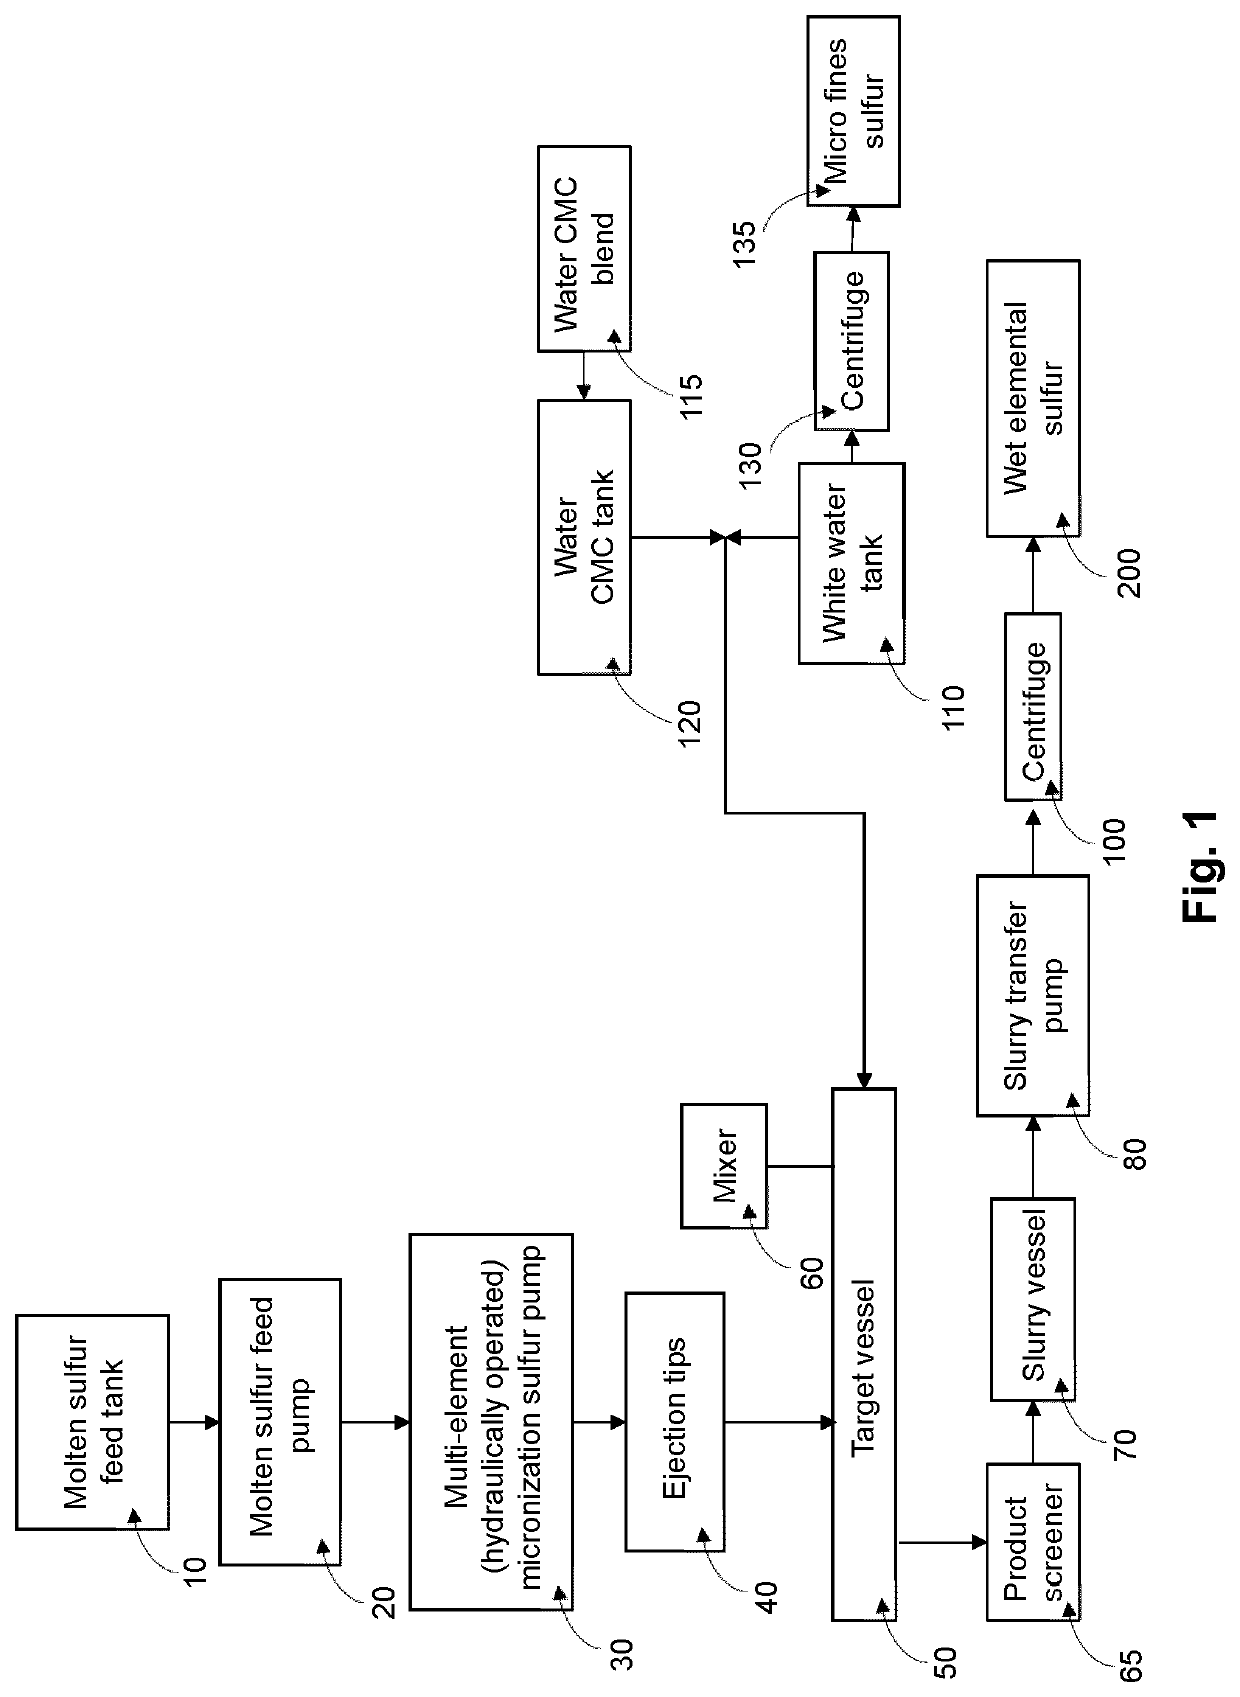 Process for the production of micronized sulfur